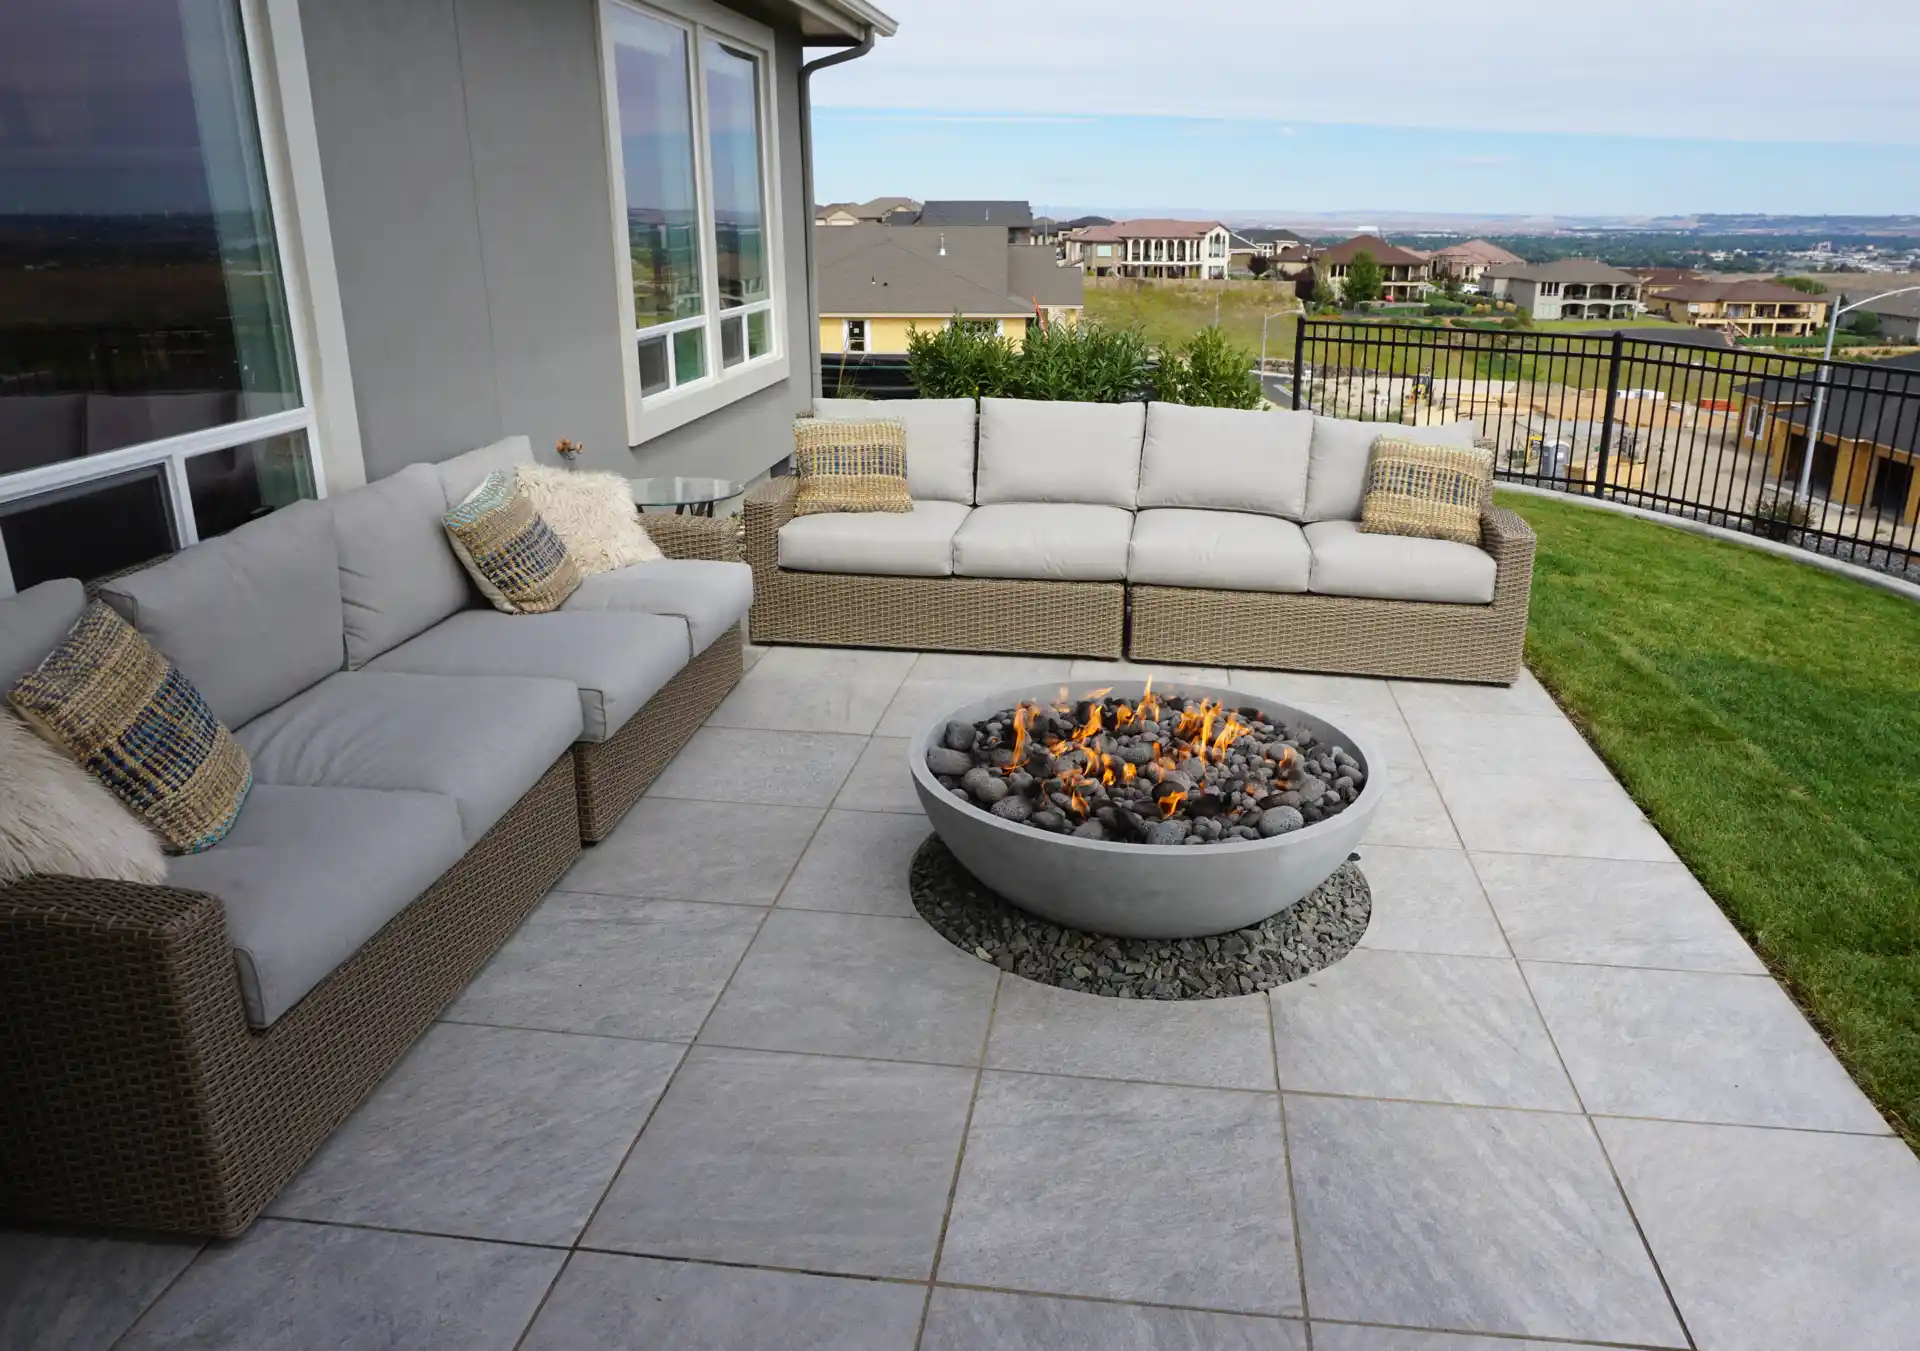 New Outdoor Patio With Fire Pit